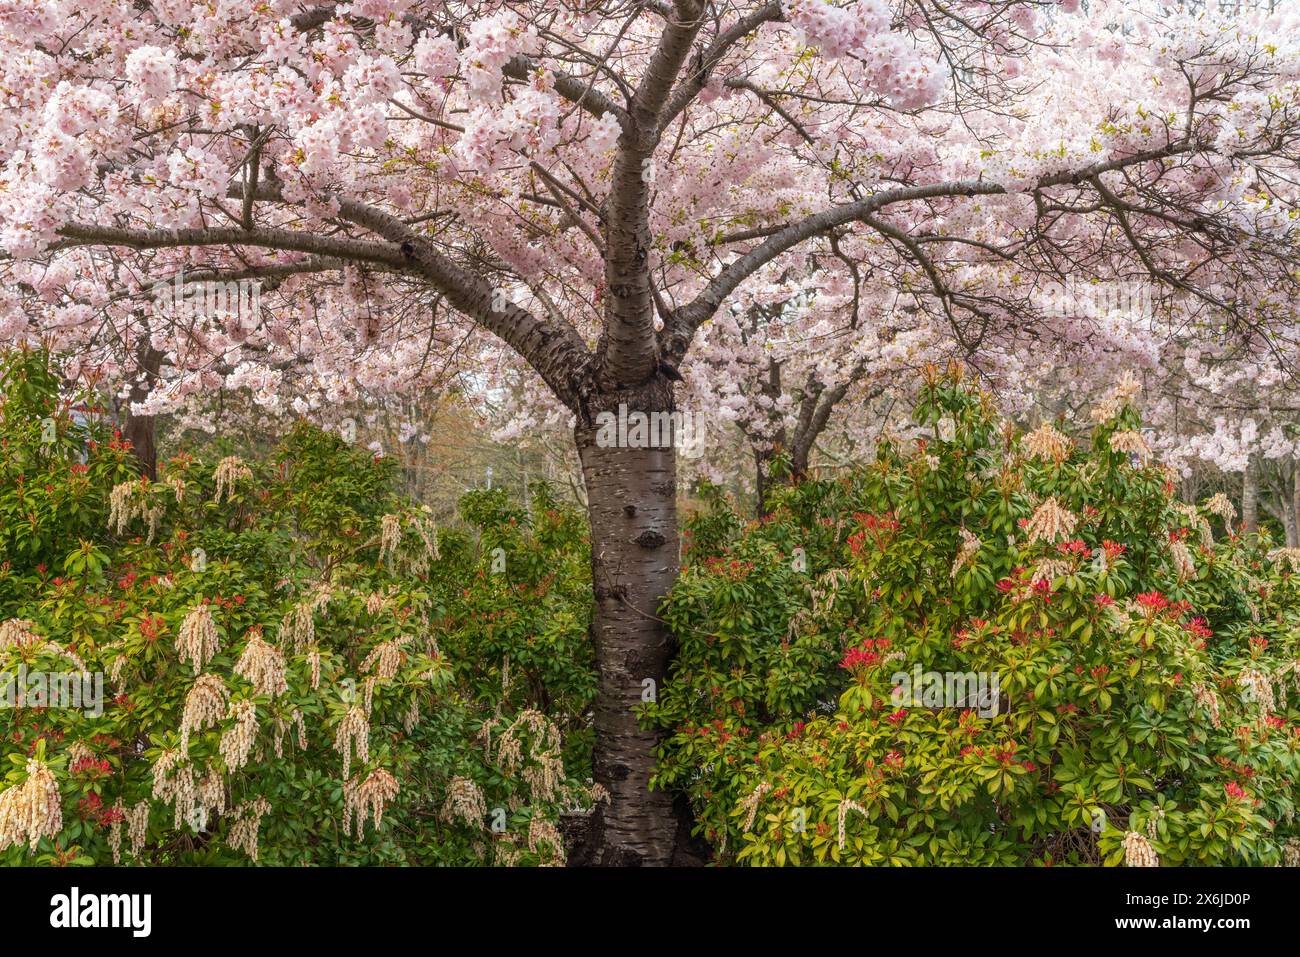 Cherry tree blossoms and Japanese pieris flowers in the Finnerty Gardens, Victoria, Vancouver Island, British Columbia, Canada. Stock Photo